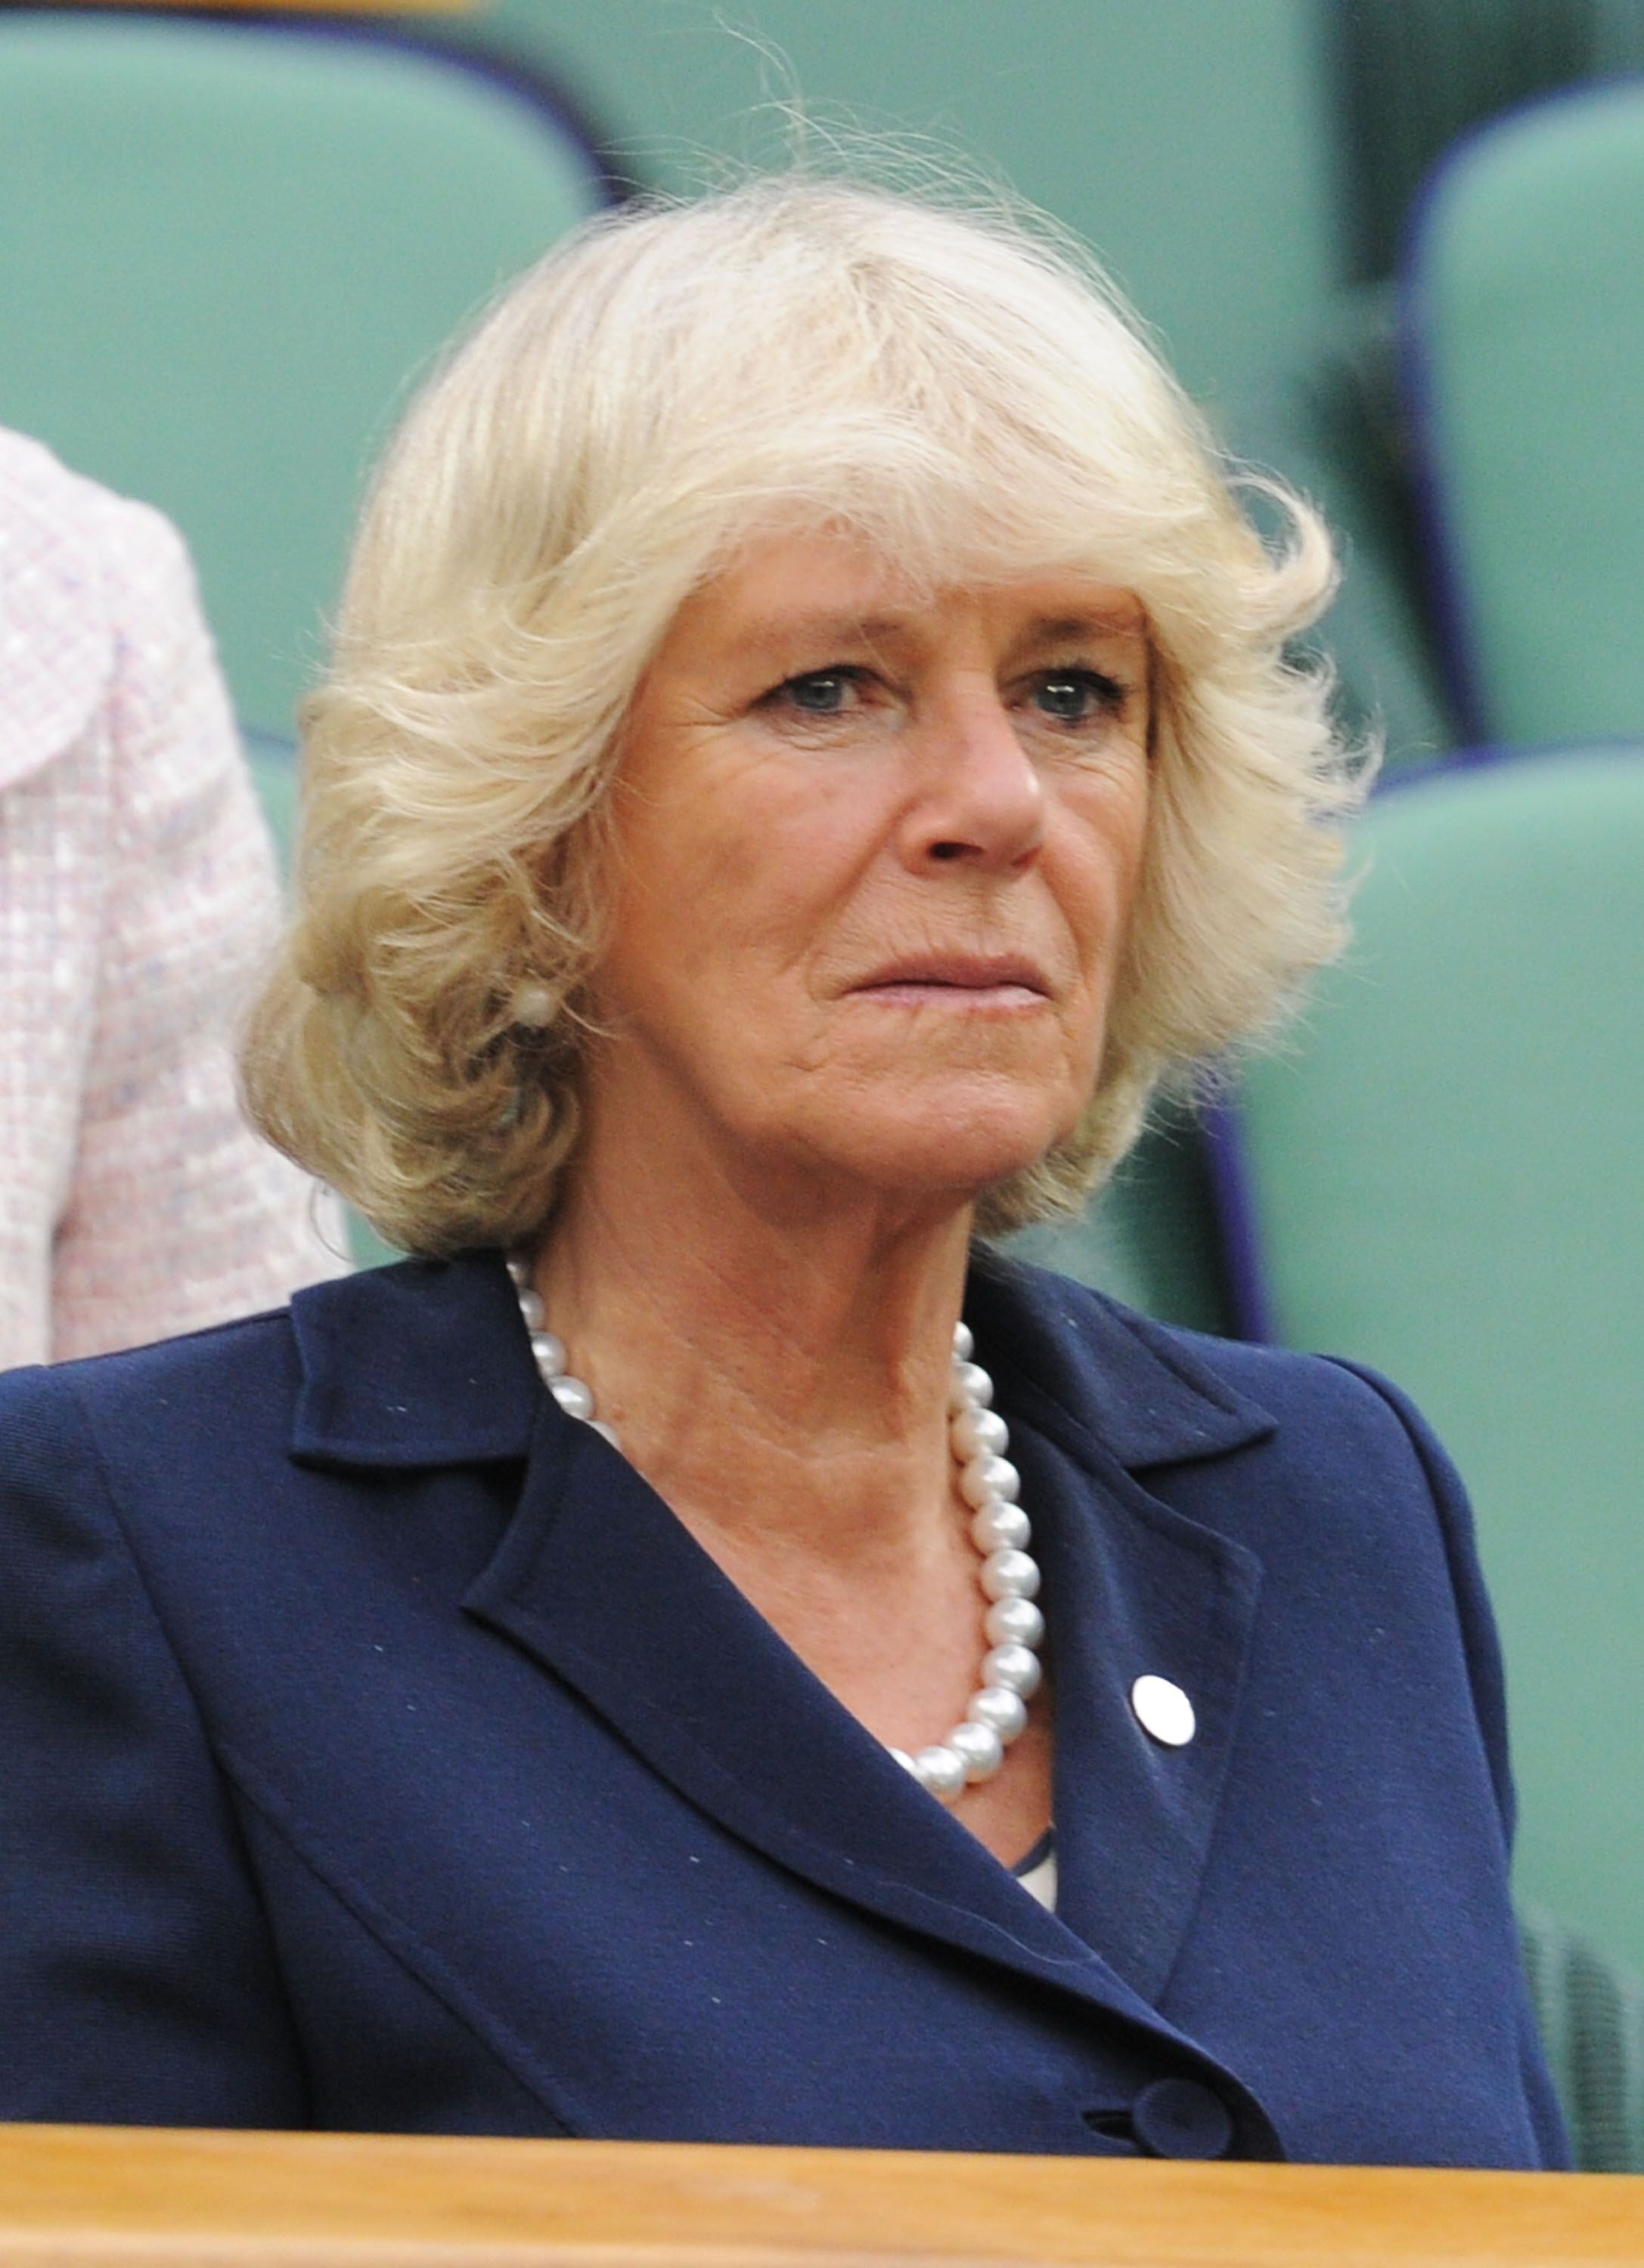 Duchess Camilla at a tennis match at the Wimbledon Lawn Tennis Championships on June 22, 2011, in London, England. | Source: Michael Regan/Getty Images